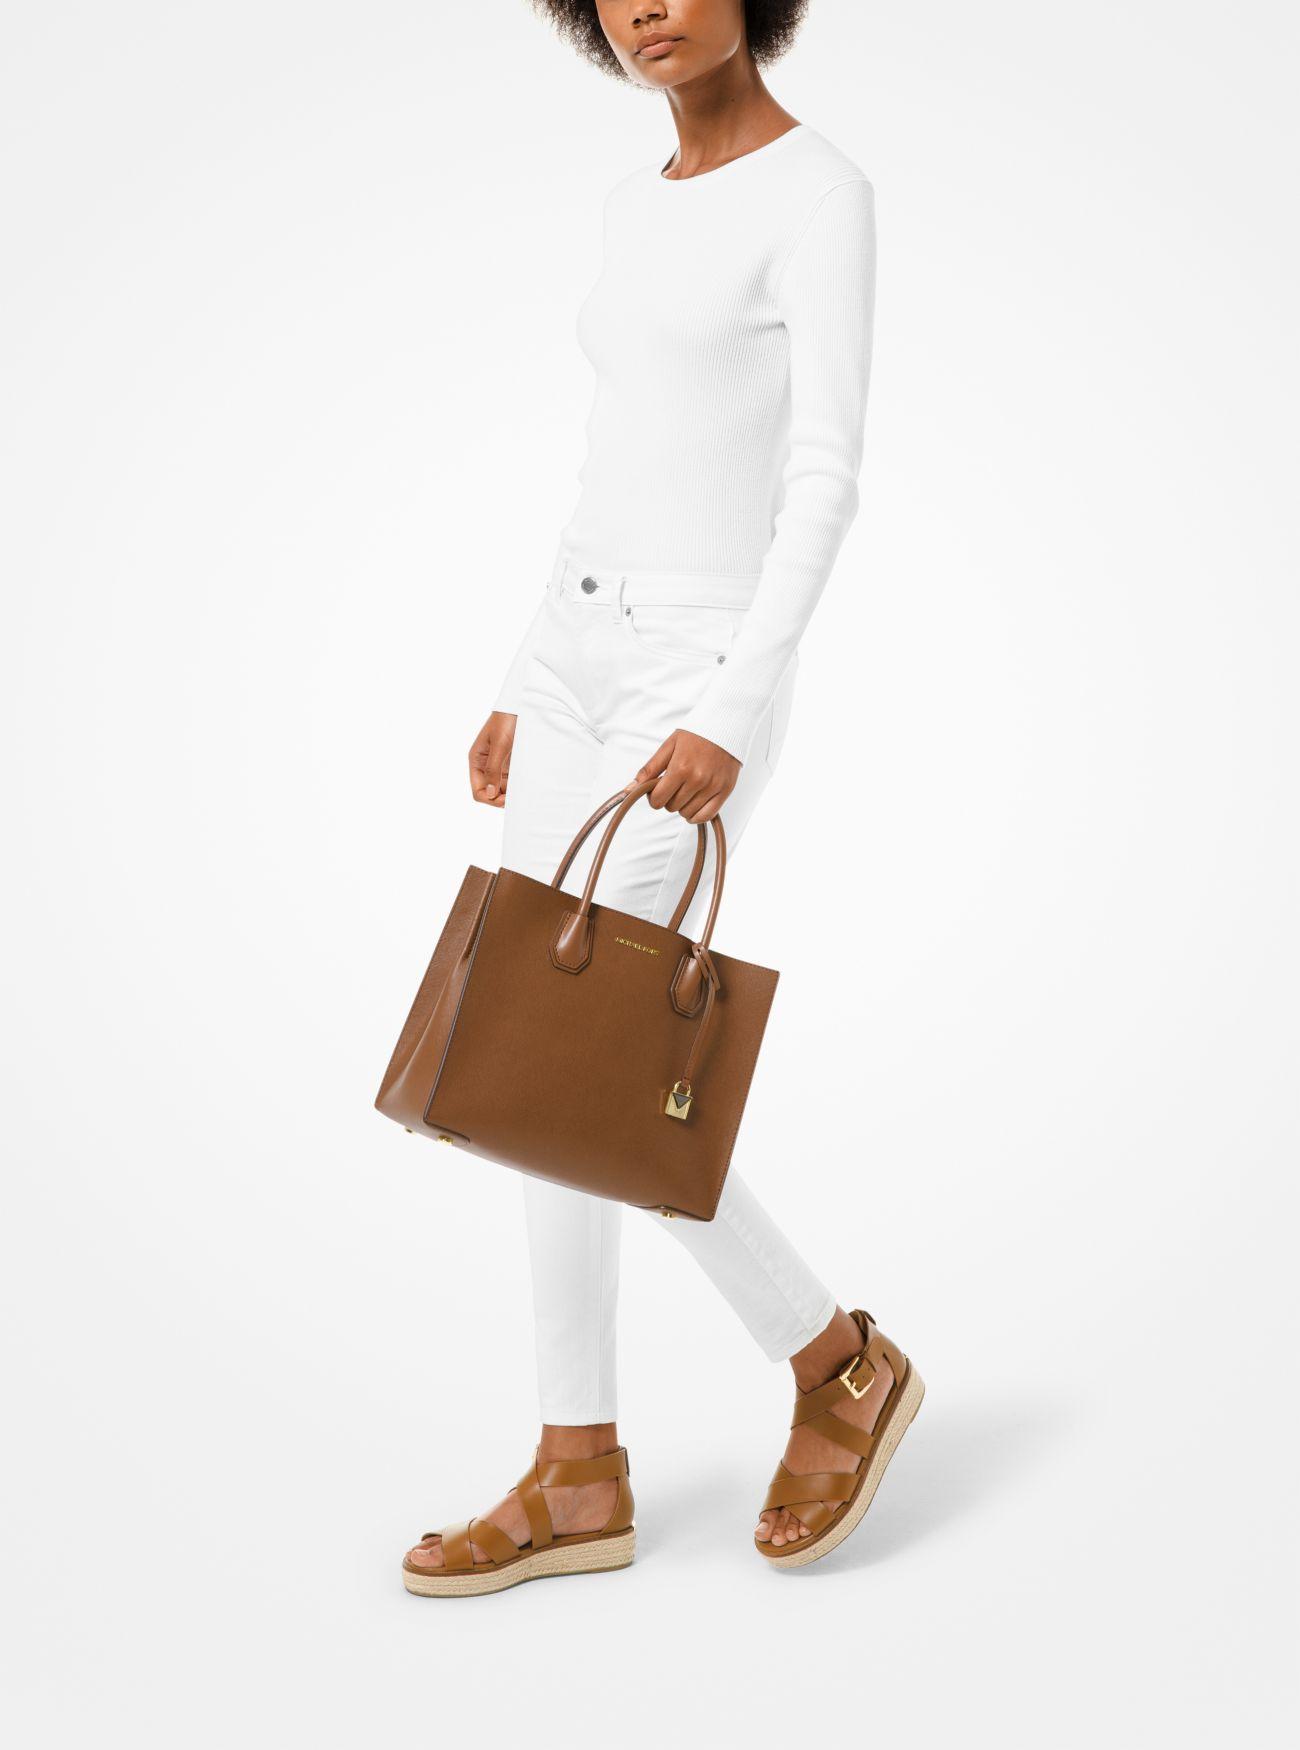 Michael Kors Mercer Large Saffiano Leather Tote Bag in Brown | Lyst UK